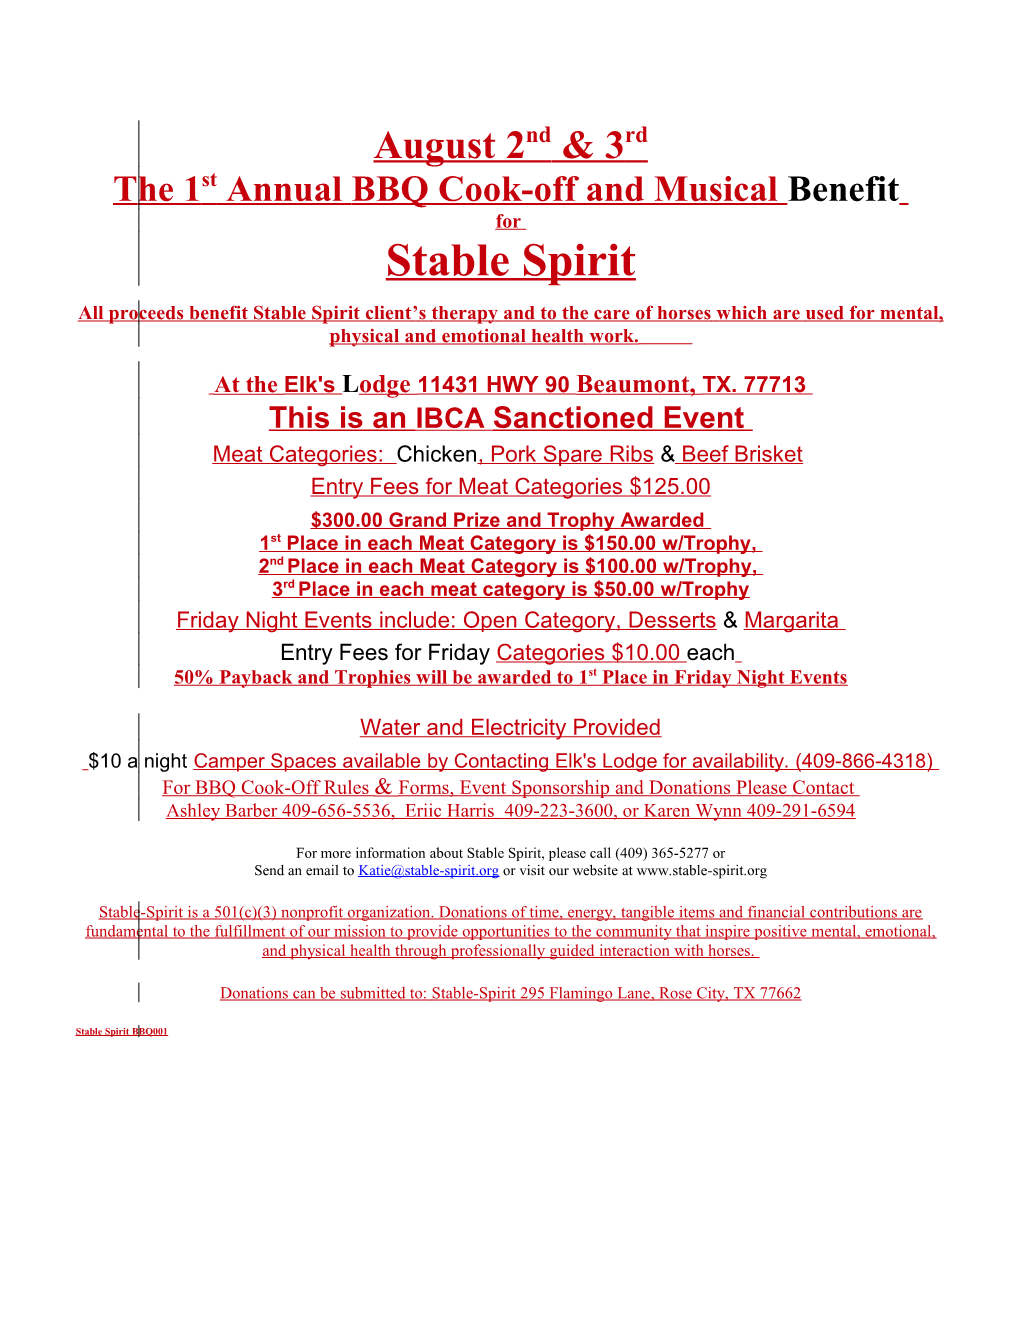 The 1St Annual BBQ Cook-Off and Musical Benefit